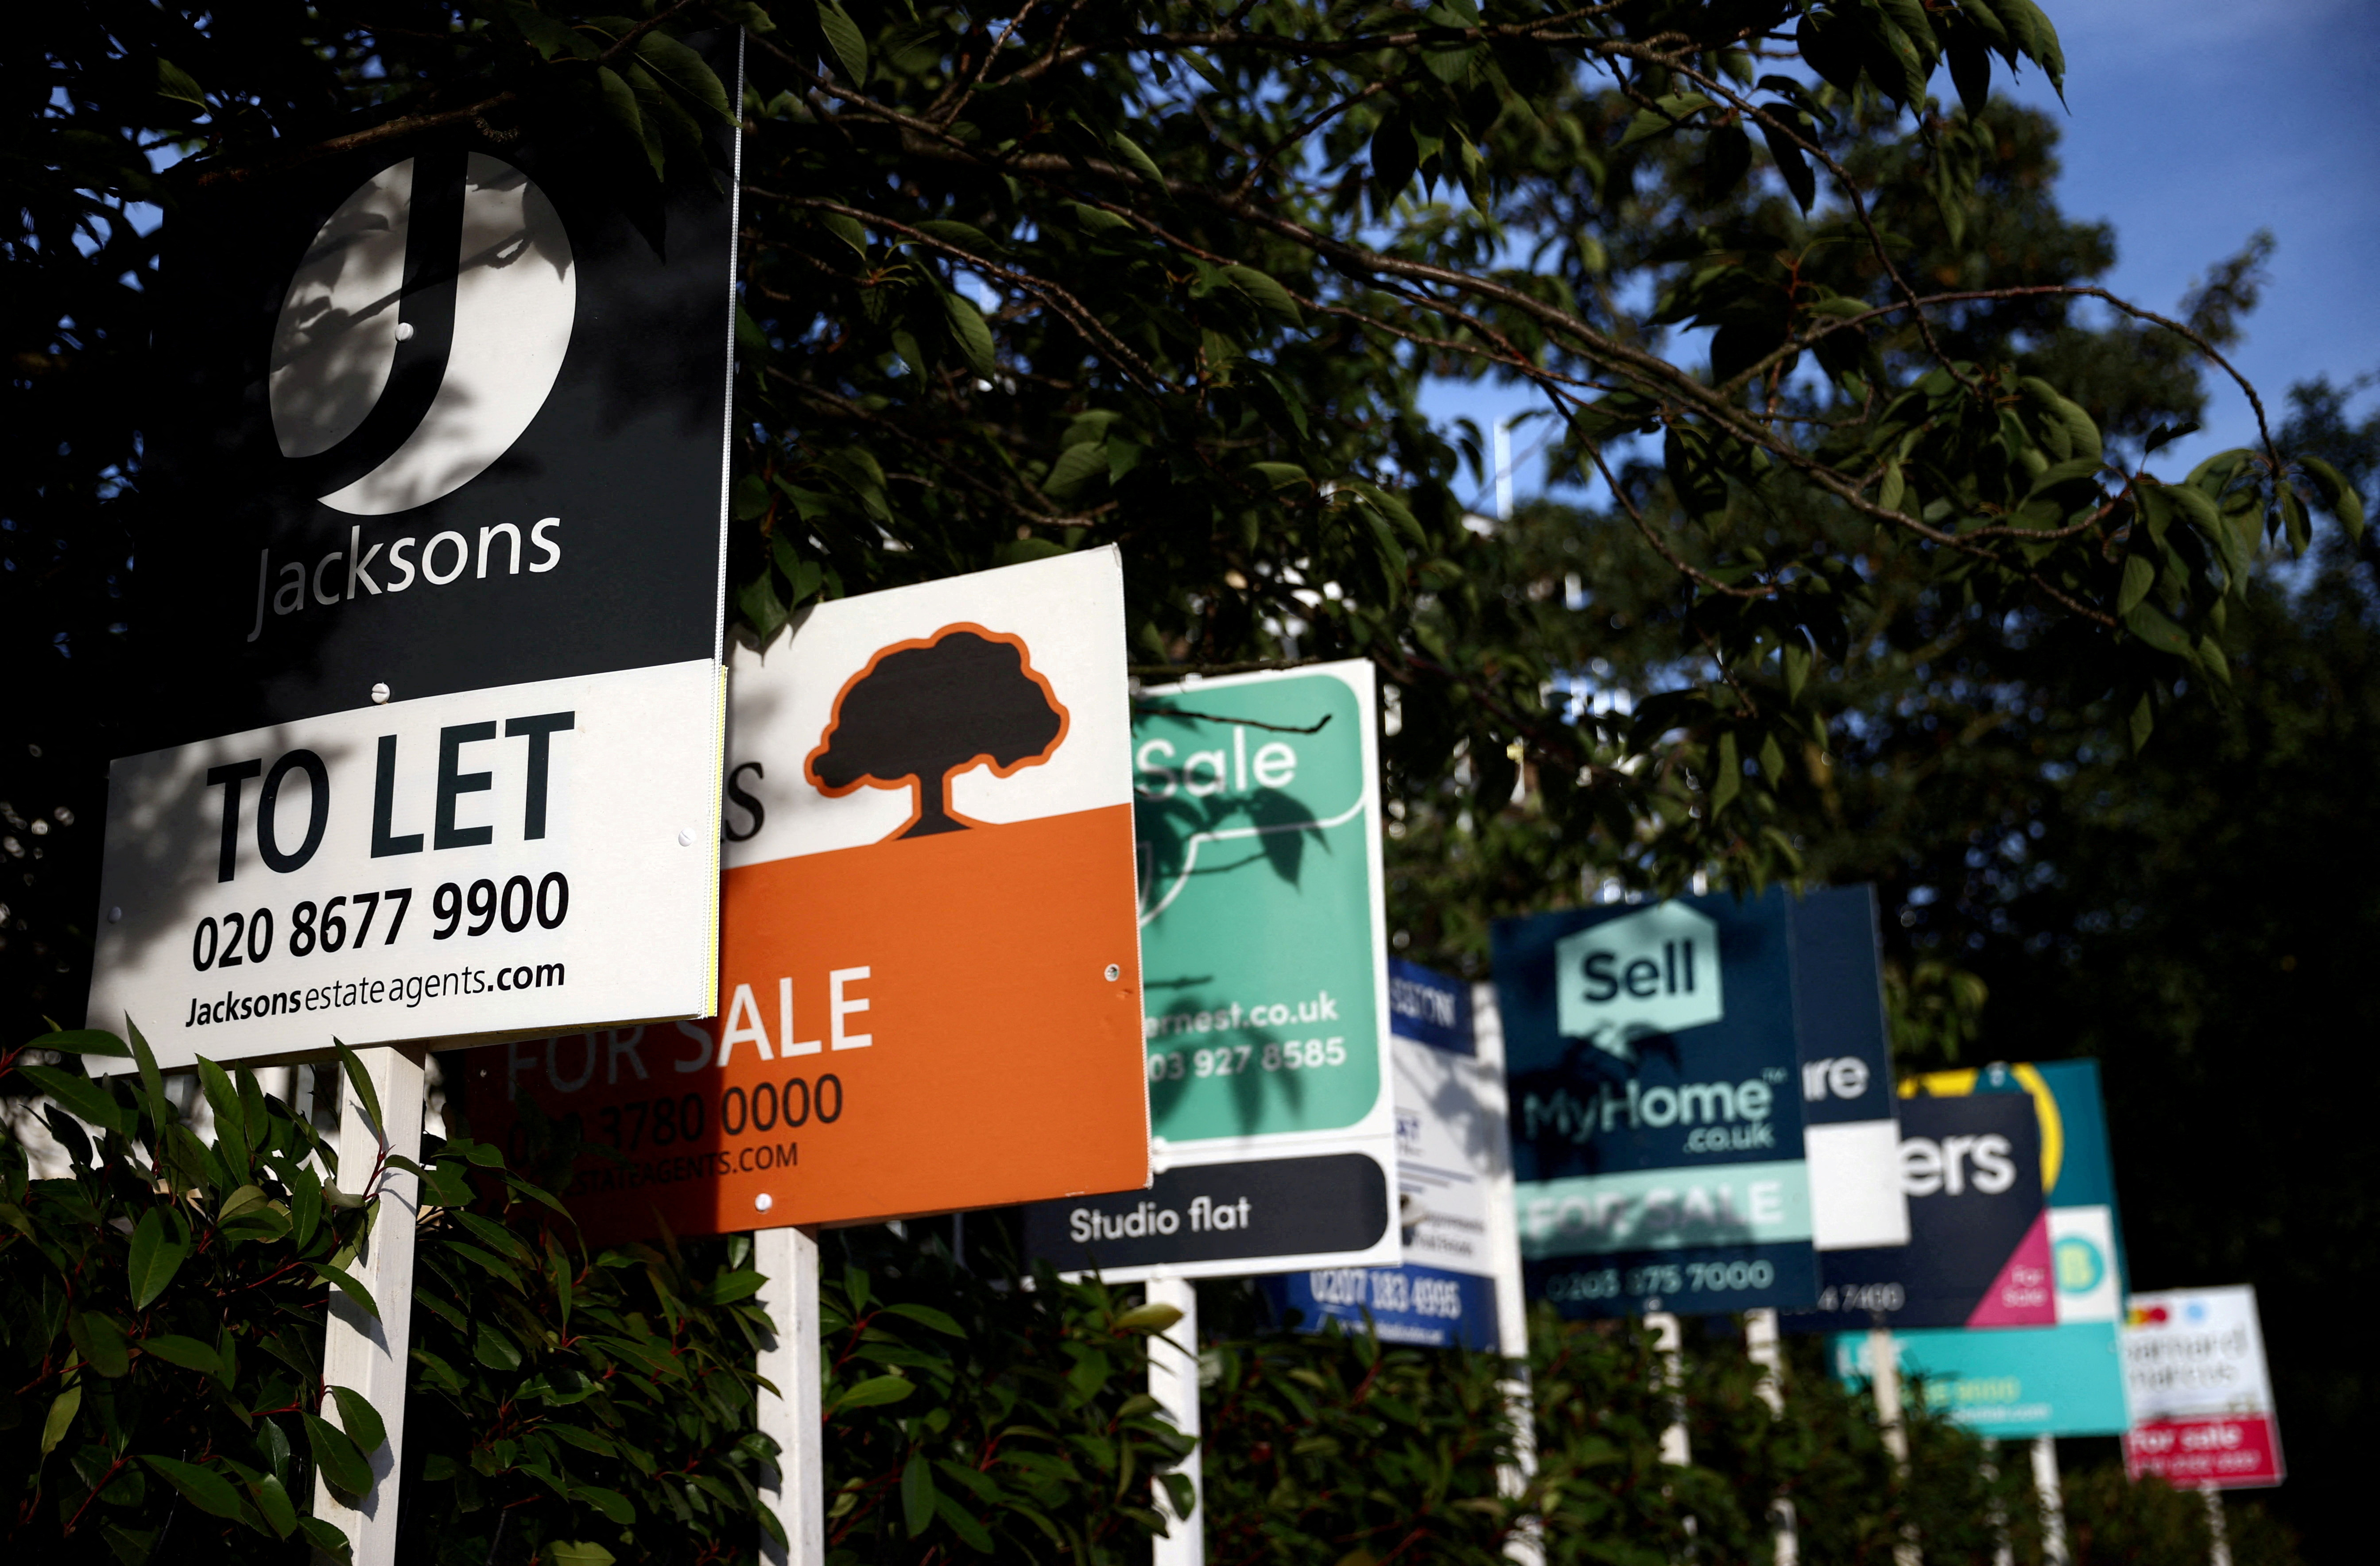 Estate agent signs are seen in south London